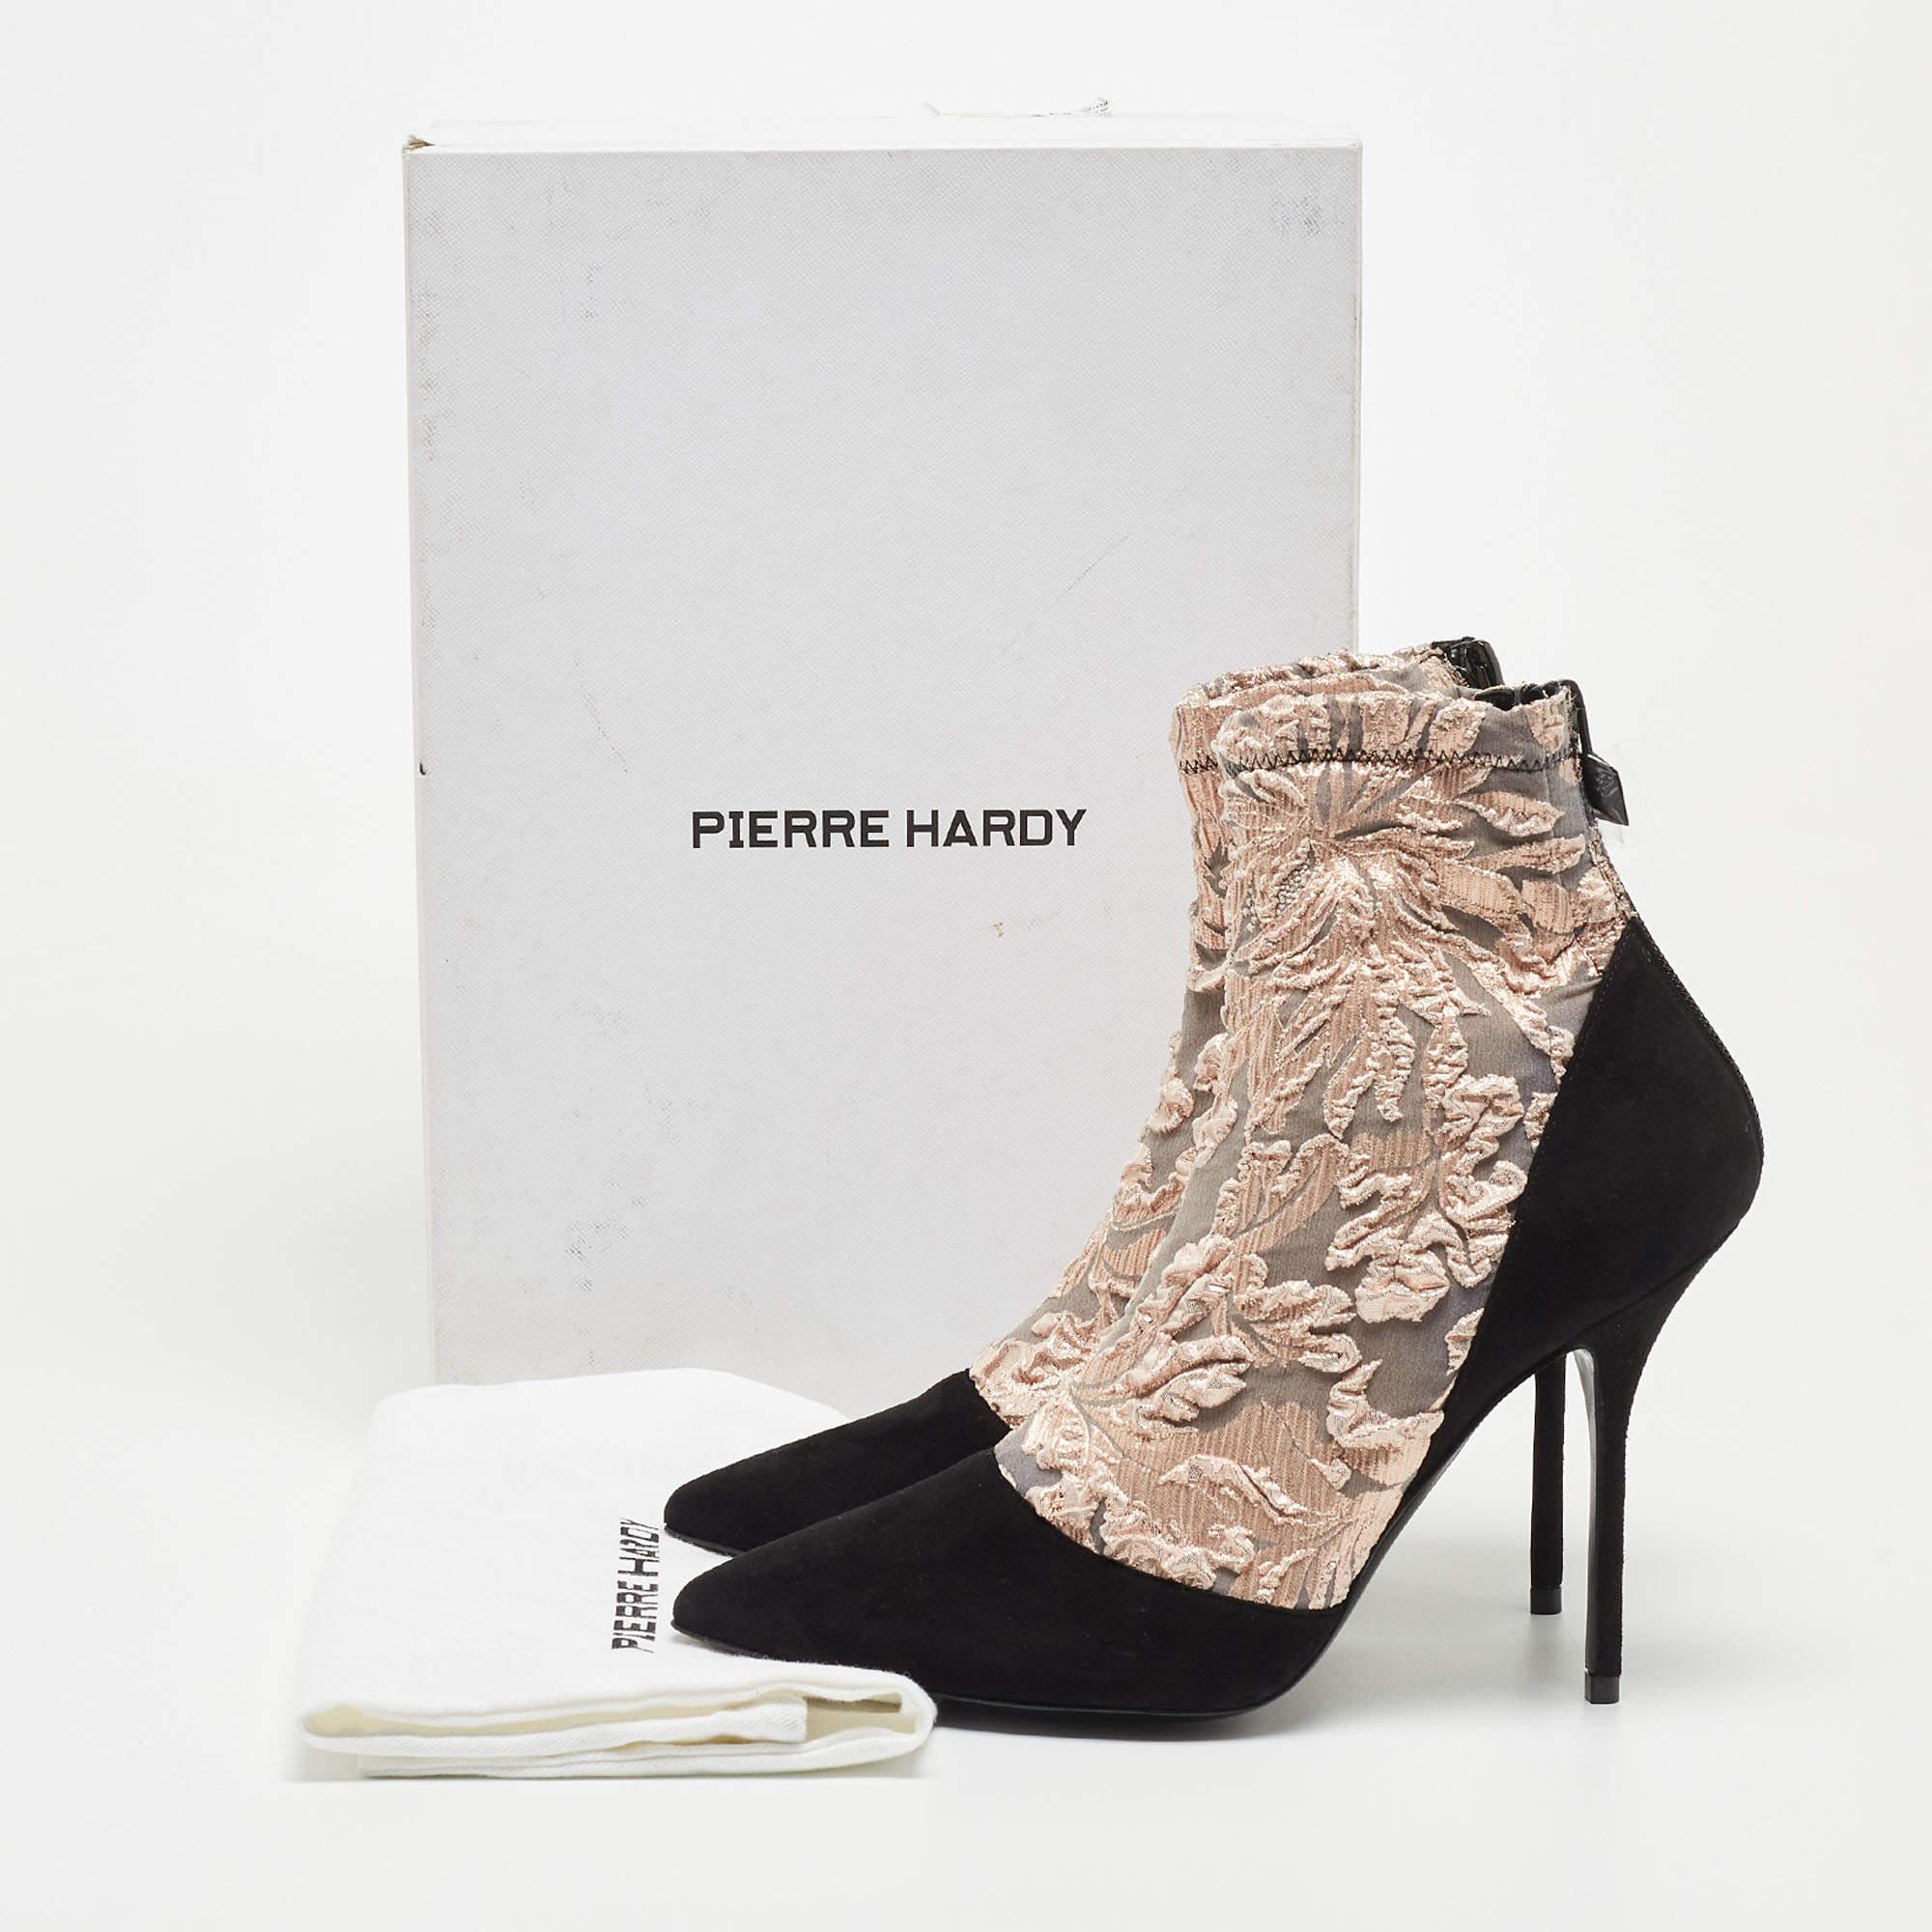 Pierre Hardy Black/Metallic Peach Fabric and Suede Dolly Pointed Toe Ankle Booti For Sale 5